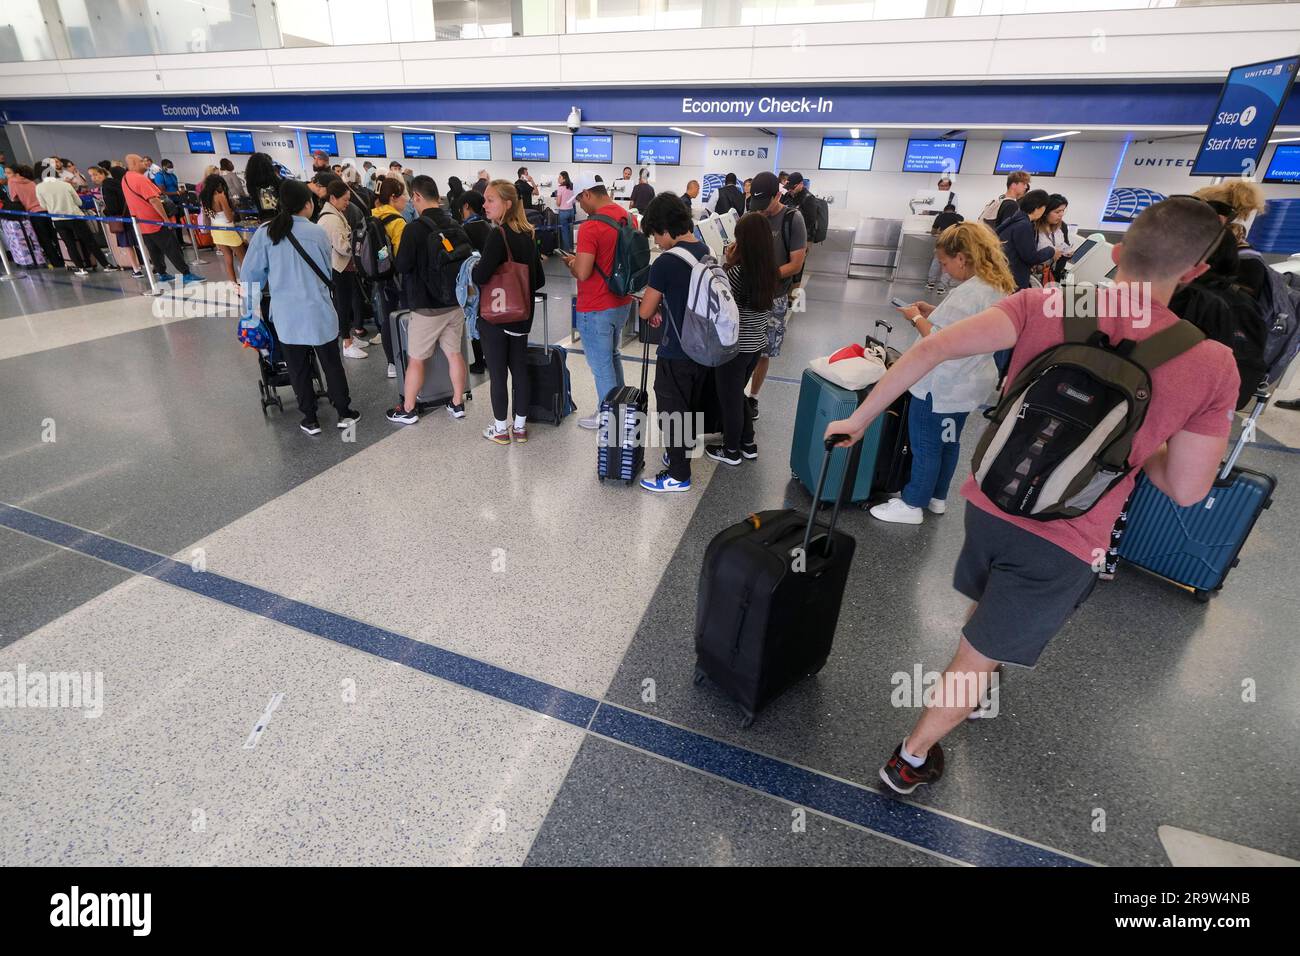 Los Angeles United States 28th June 2023 Holiday Travelers Wait A In Line To Check In At The Los Angeles International Airport In Los Angeles Credit Sopa Images Limitedalamy Live News 2R9W4NB 